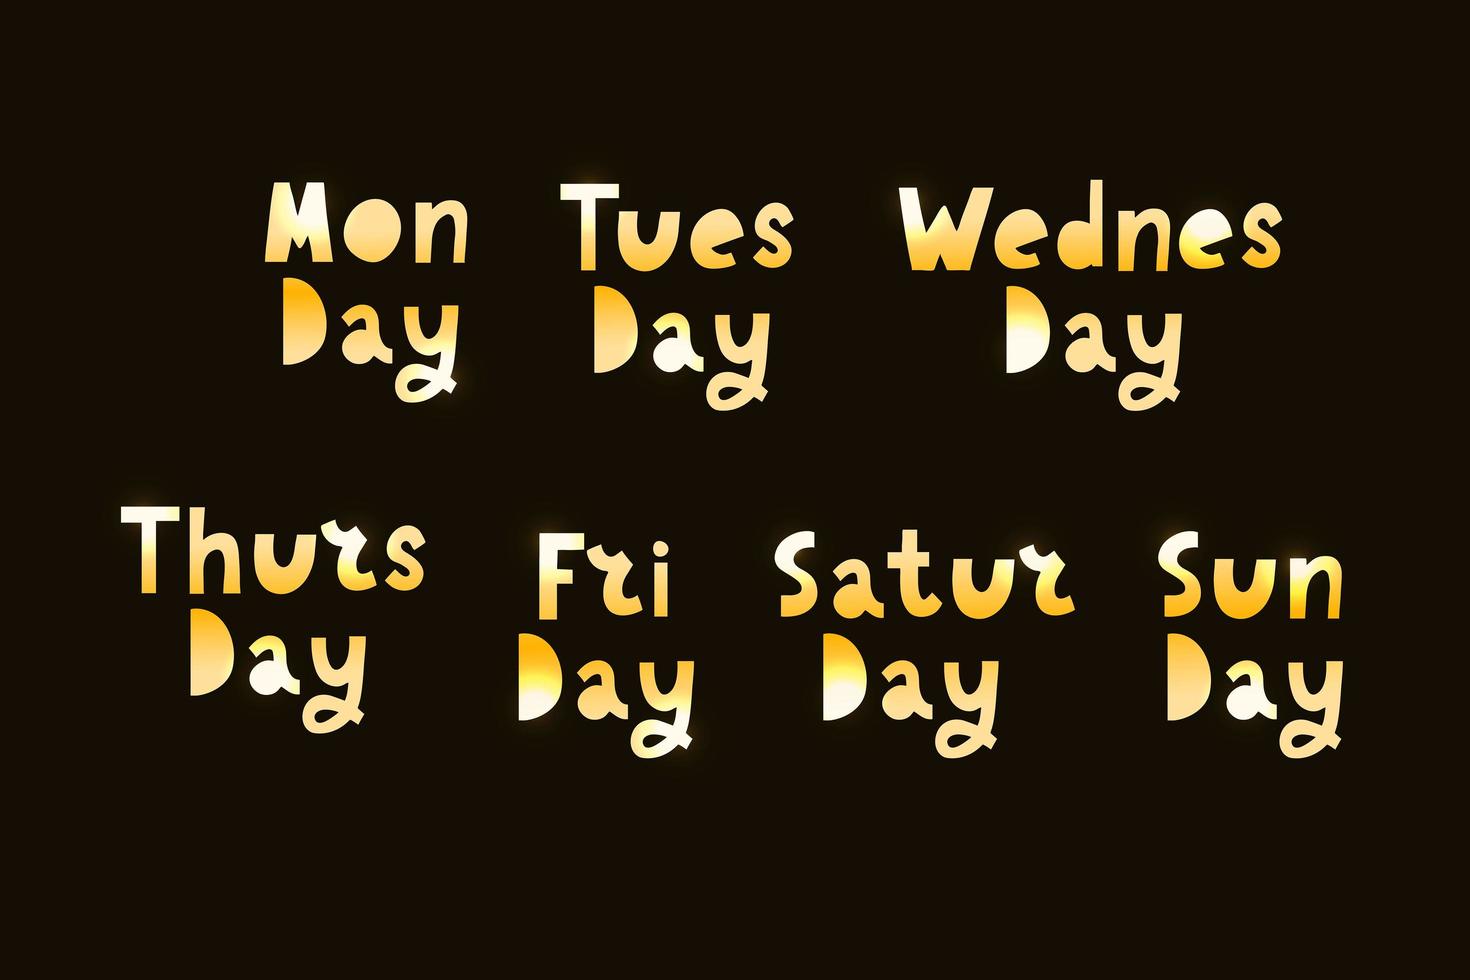 Names of days of the week vector